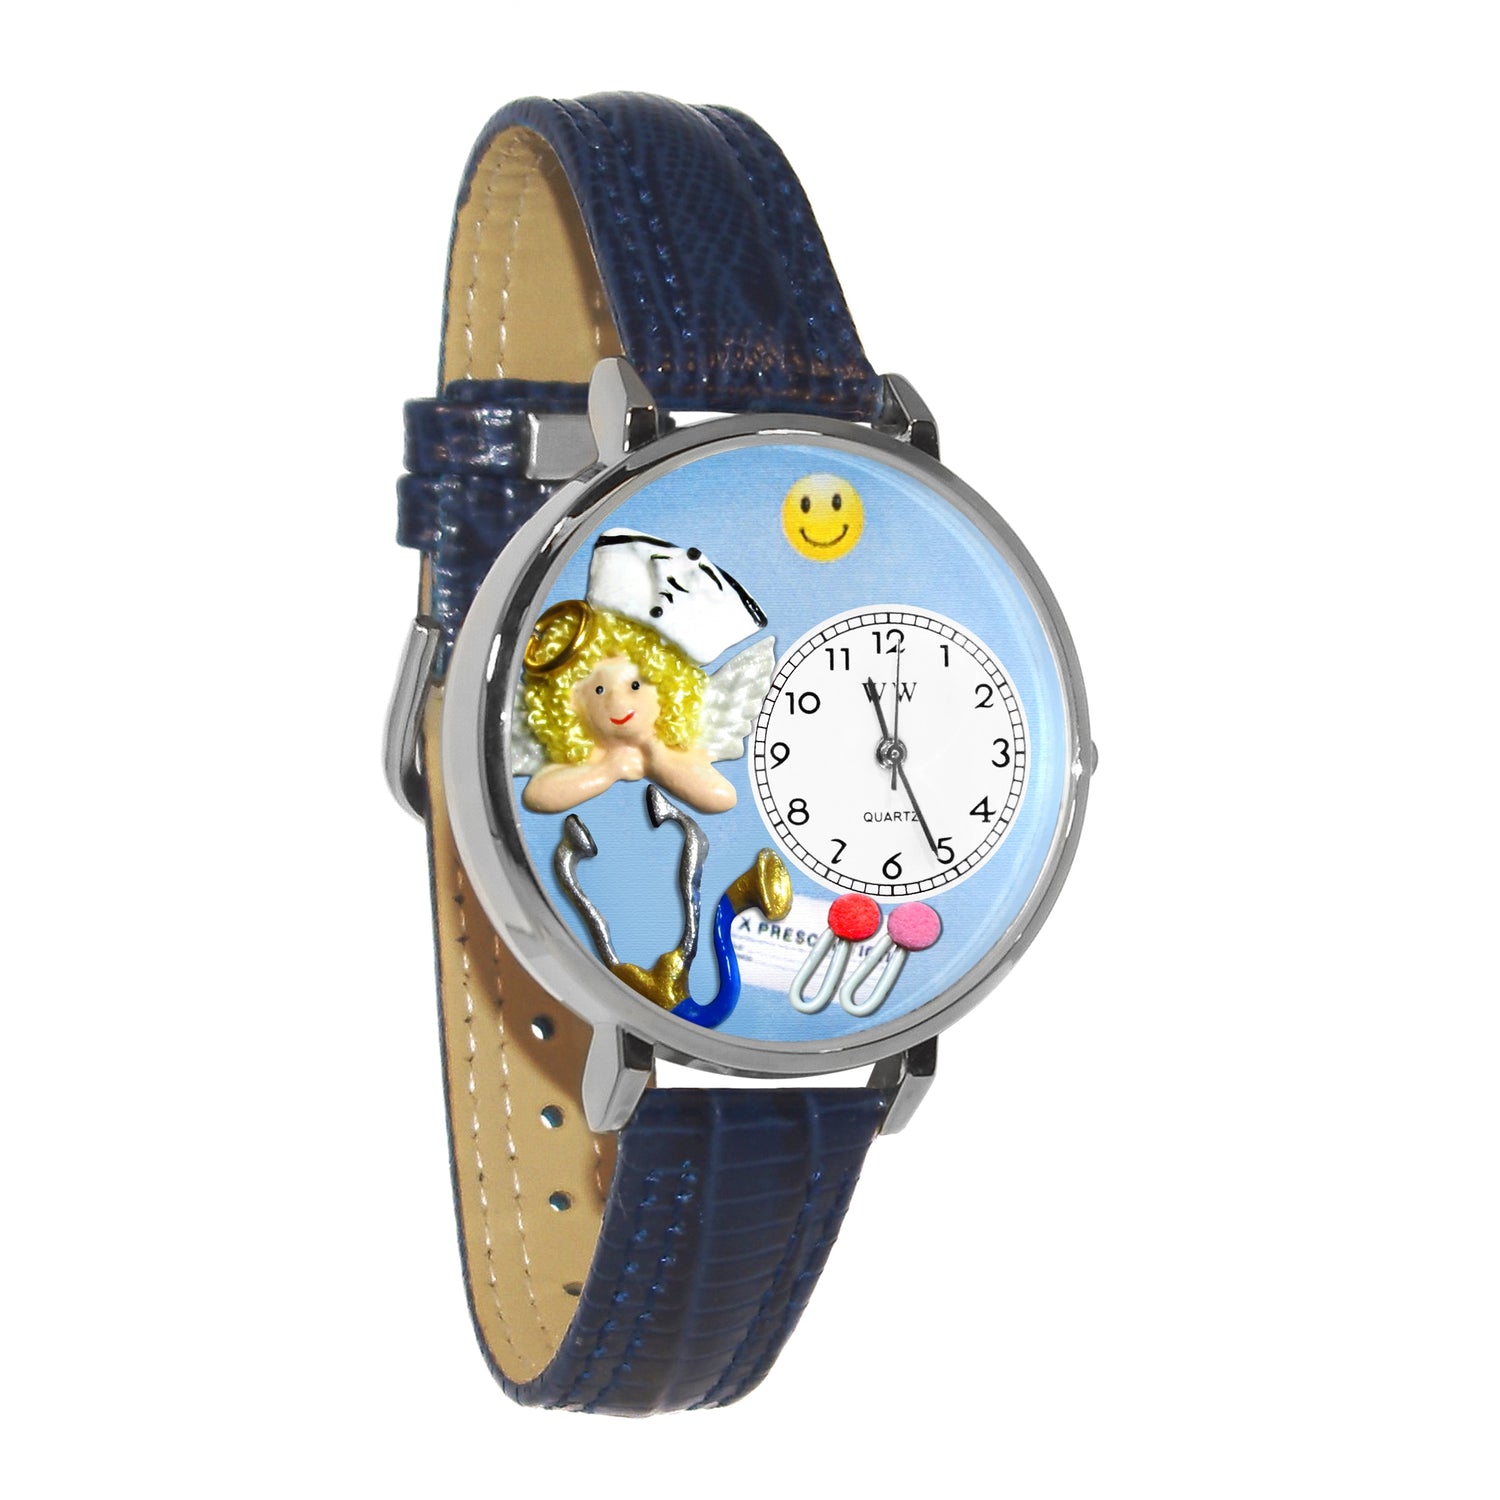 Whimsical Gifts | Nurse Angel 3D Watch Large Style | Handmade in USA | Professions Themed | Nurse | Novelty Unique Fun Miniatures Gift | Silver Finish Navy Blue Leather Watch Band